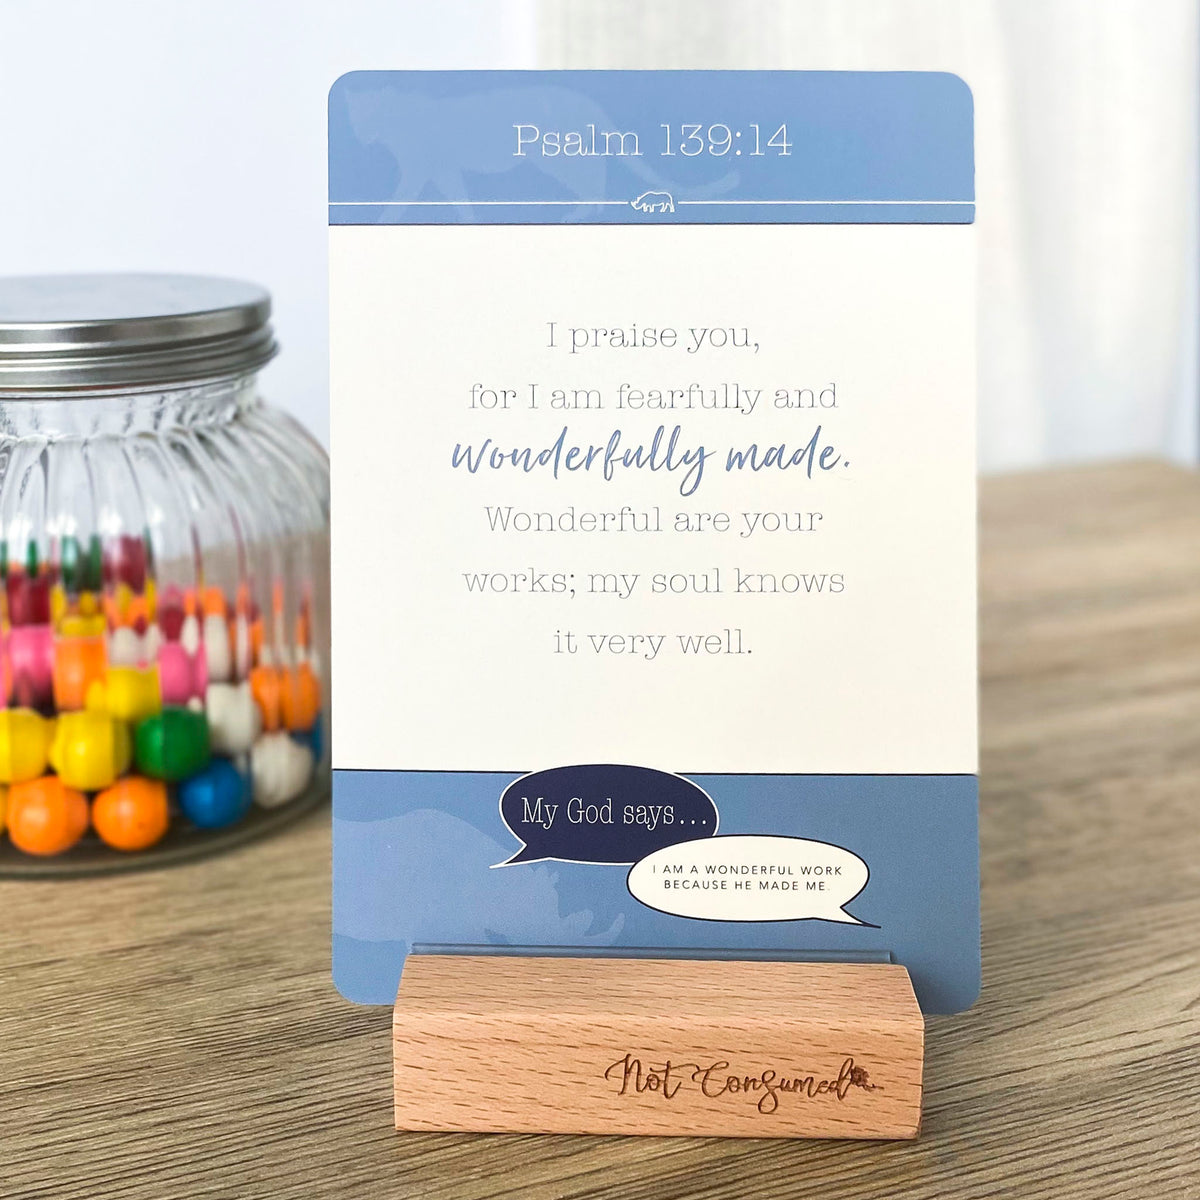 Scripture Truth Cards for boys